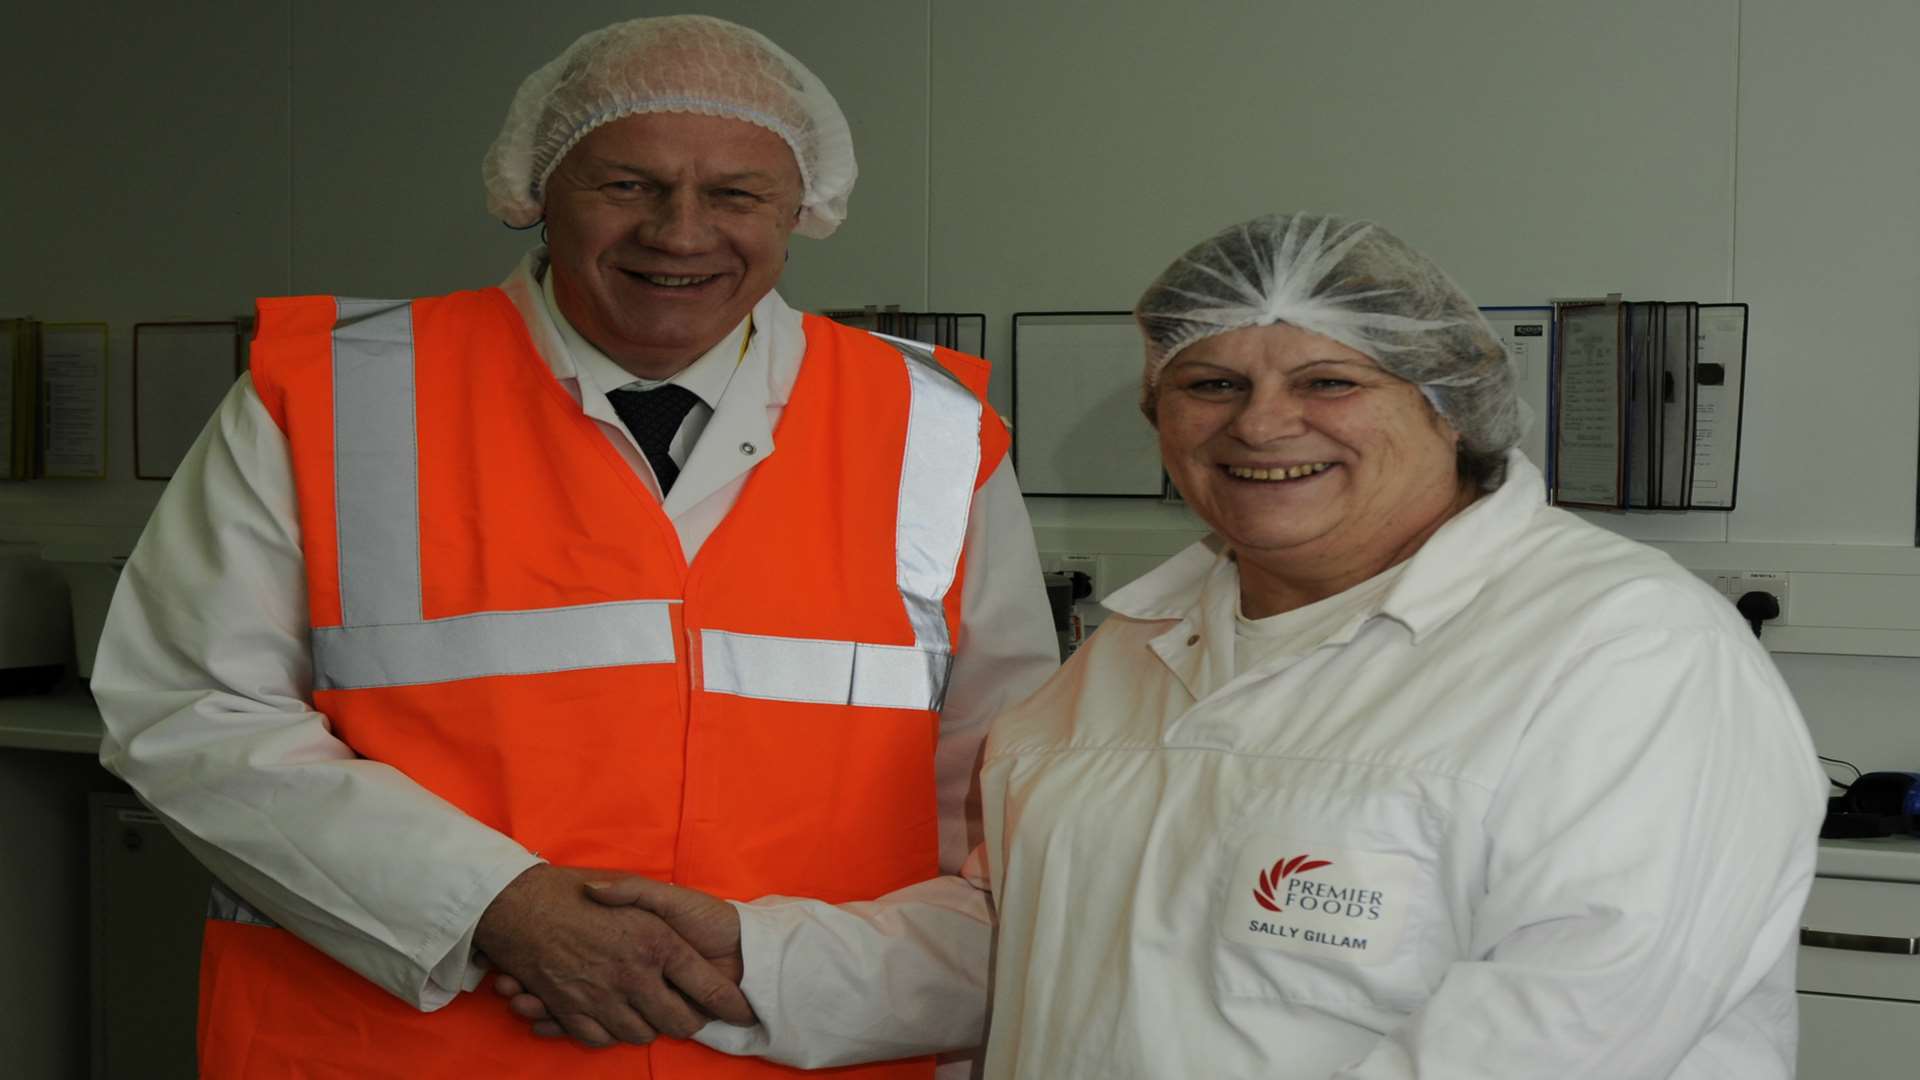 Ashford MP and Work and Pensions Secretary Damian Green congratulates Sally Gillam on 40 years of service at the town's Premier Foods factory